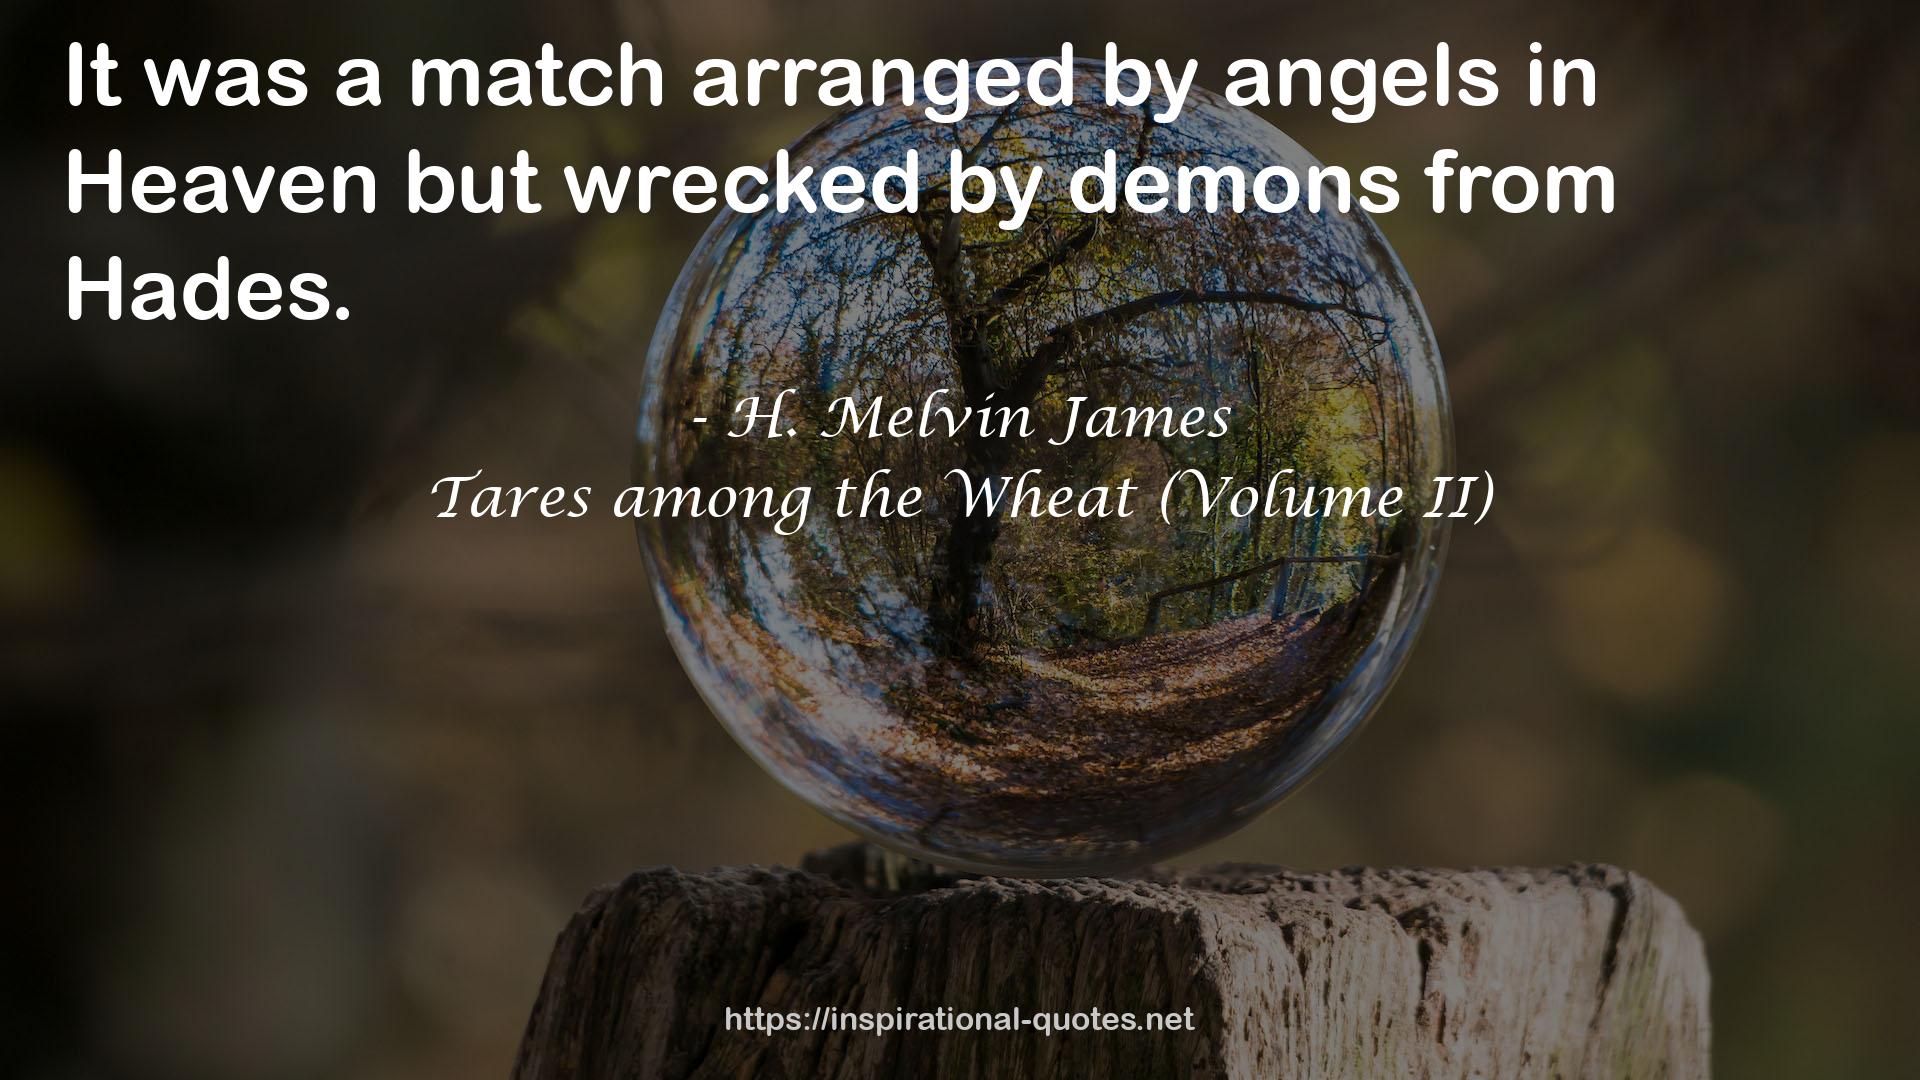 Tares among the Wheat (Volume II) QUOTES